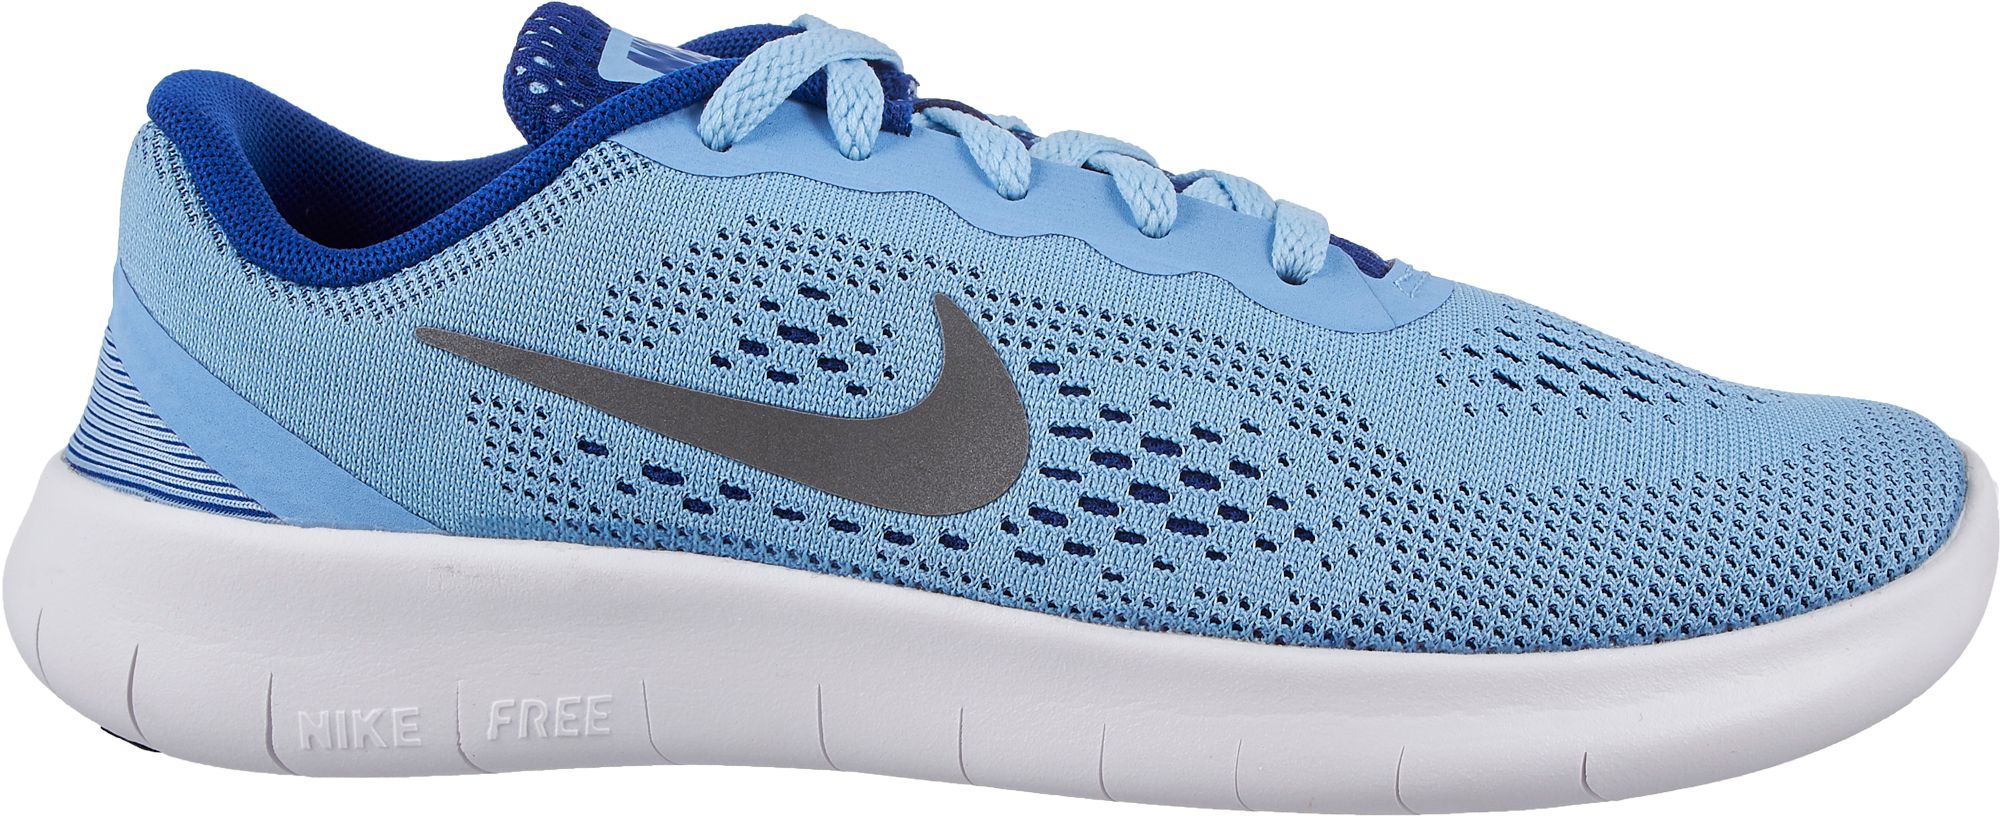 Nike Free Running Shoes | DICK'S Sporting Goods